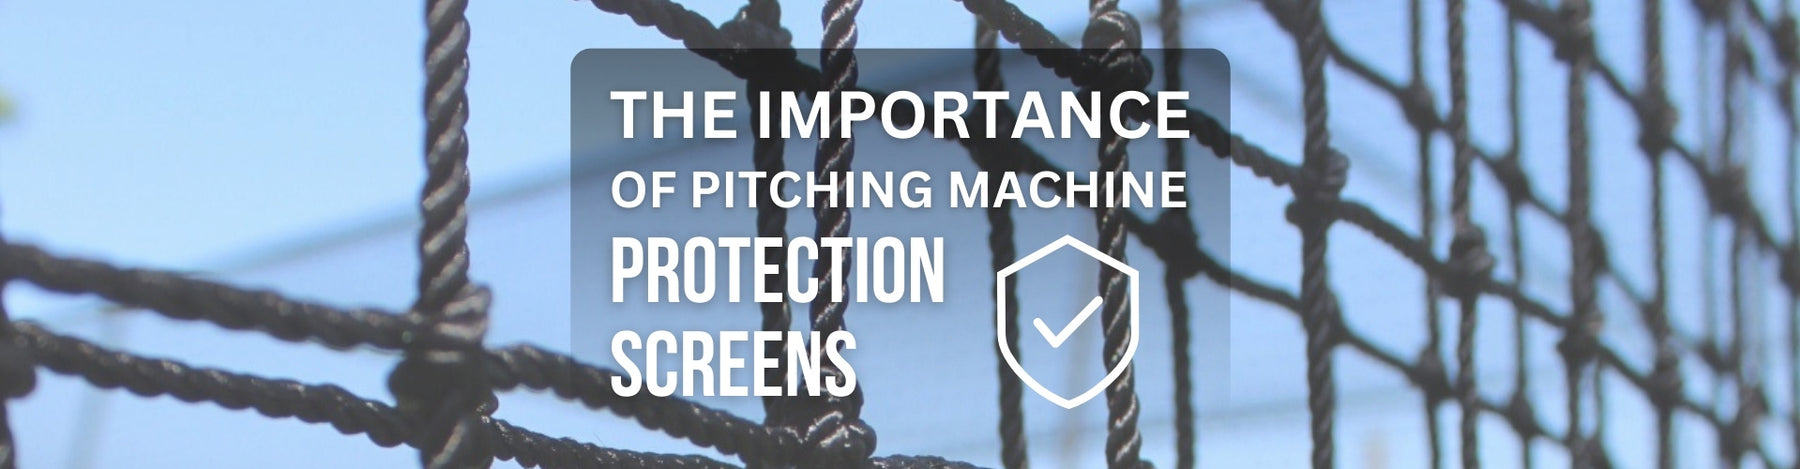 Safeguarding Your Investment: The Importance of Pitching Machine Protection Screens